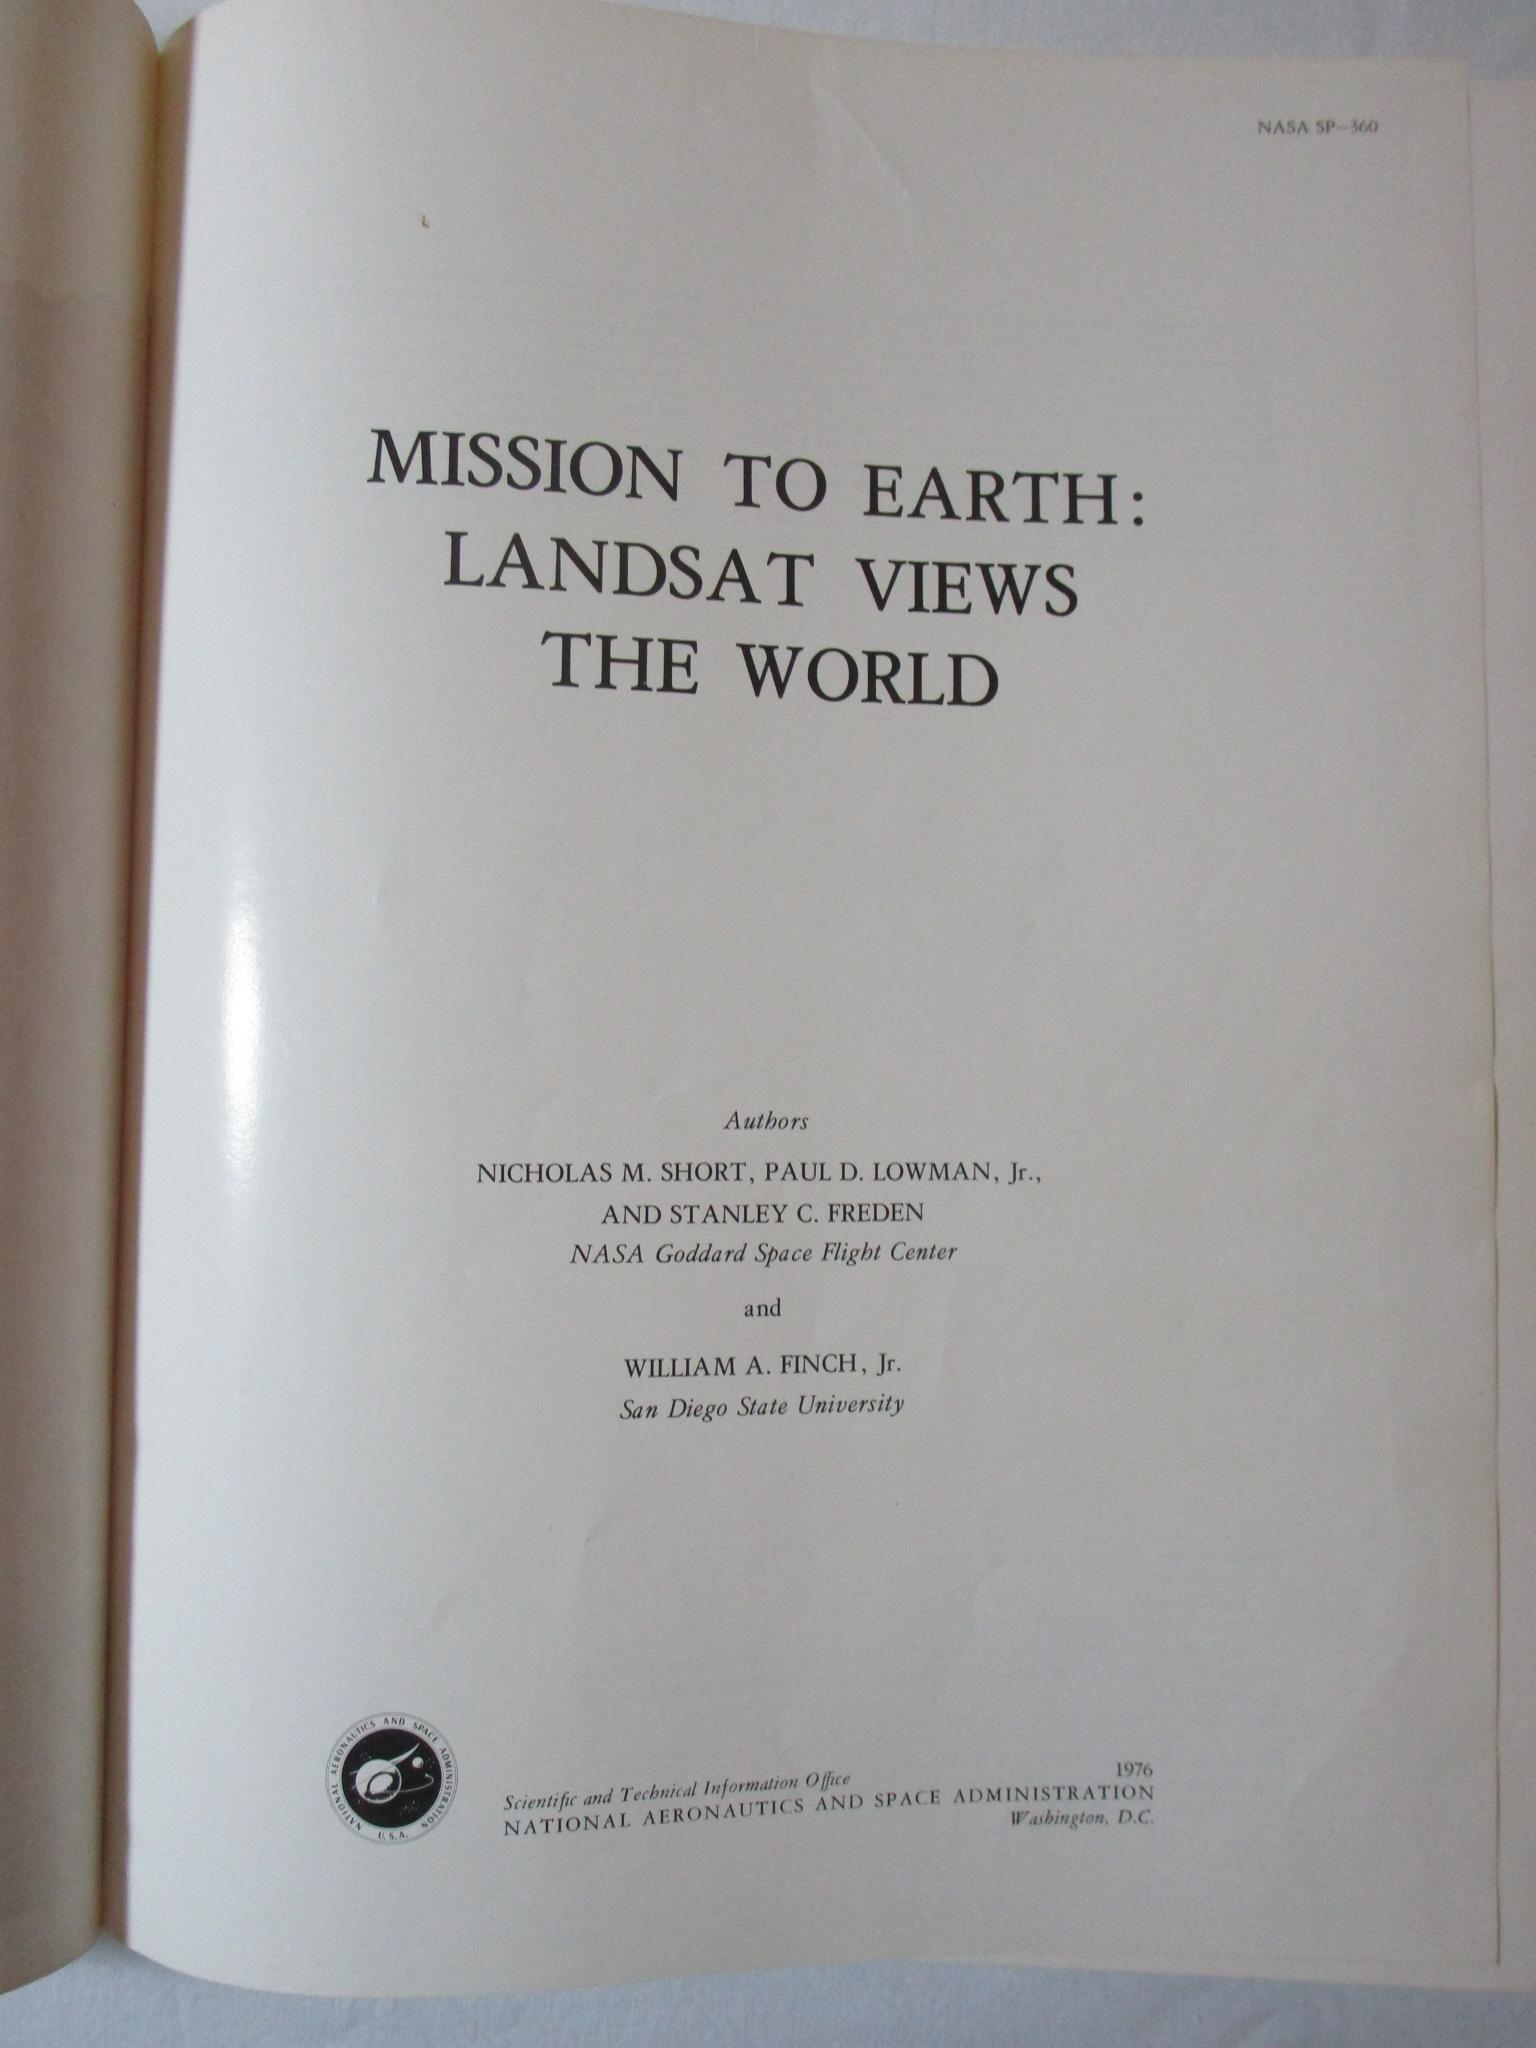 Coffee Table Book - Mission to Earth: Landsat Views The World